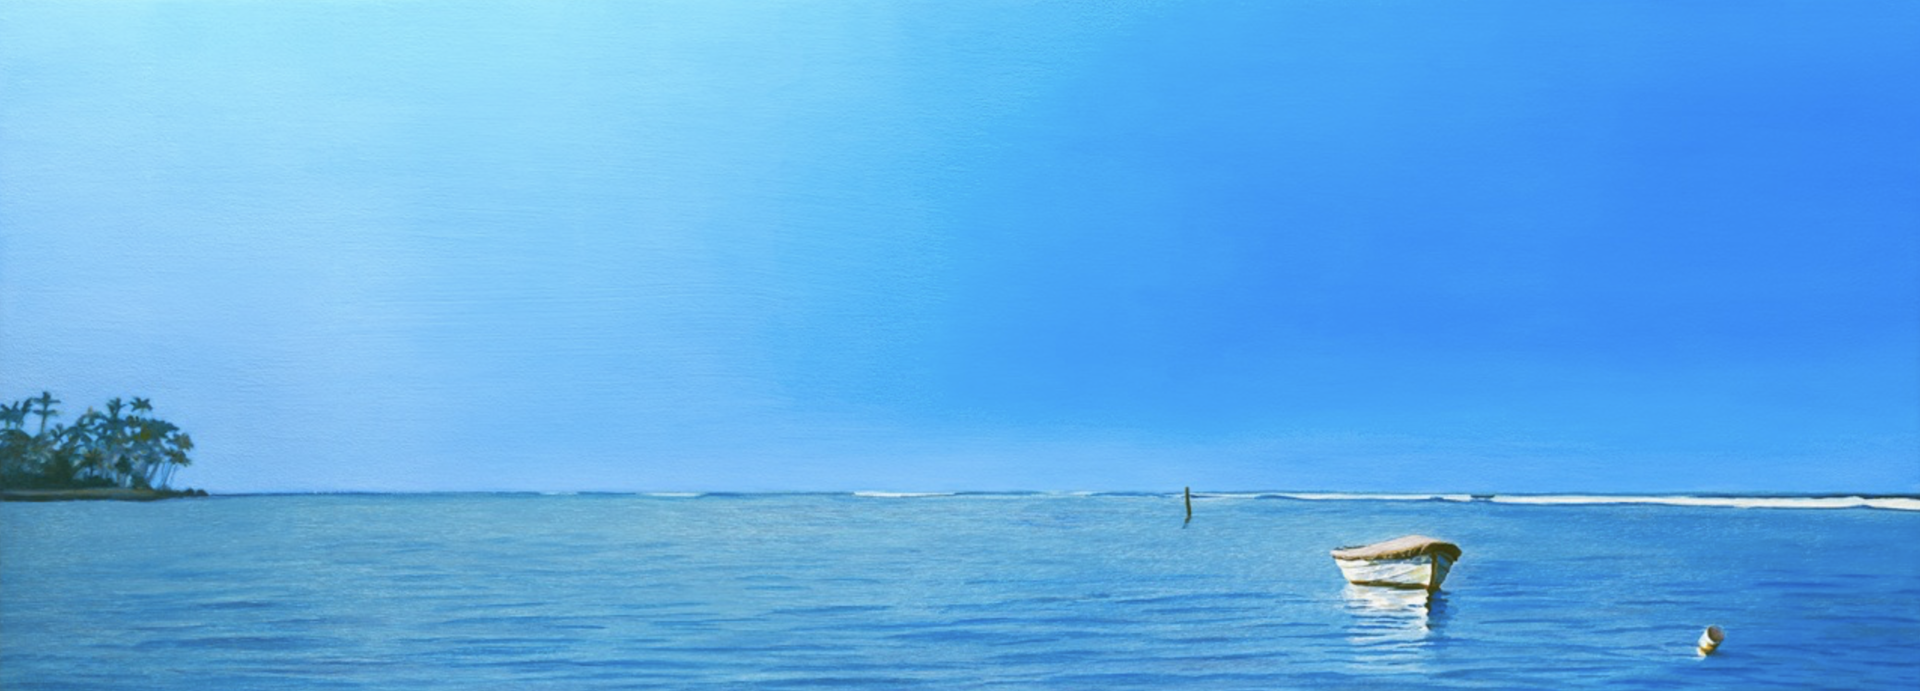 Simple Way, Cloudless Day by Joelle C.